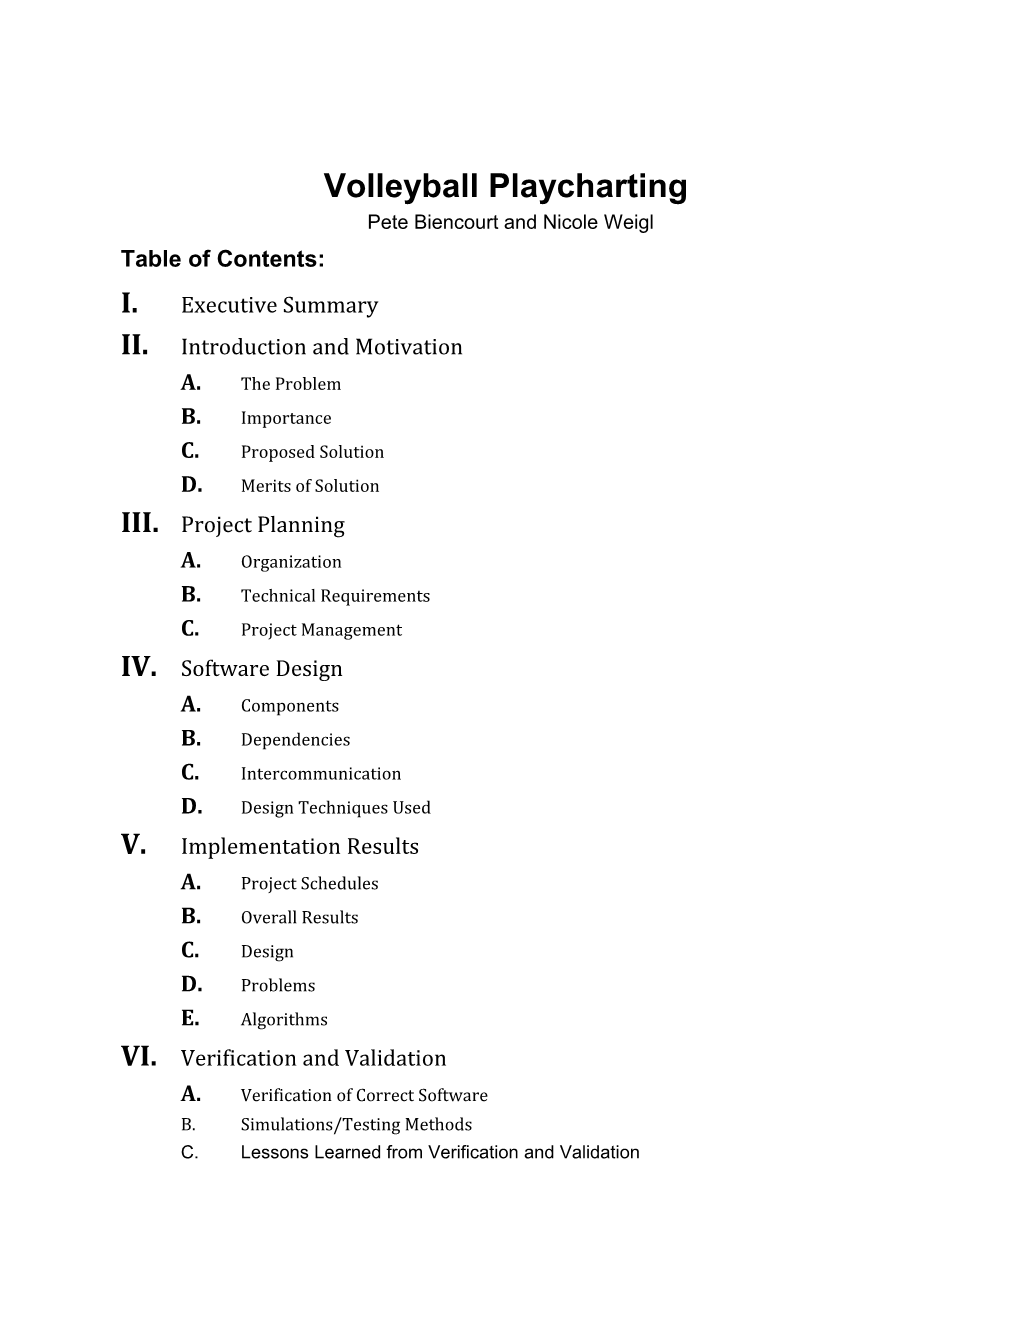 Volleyball Playcharting